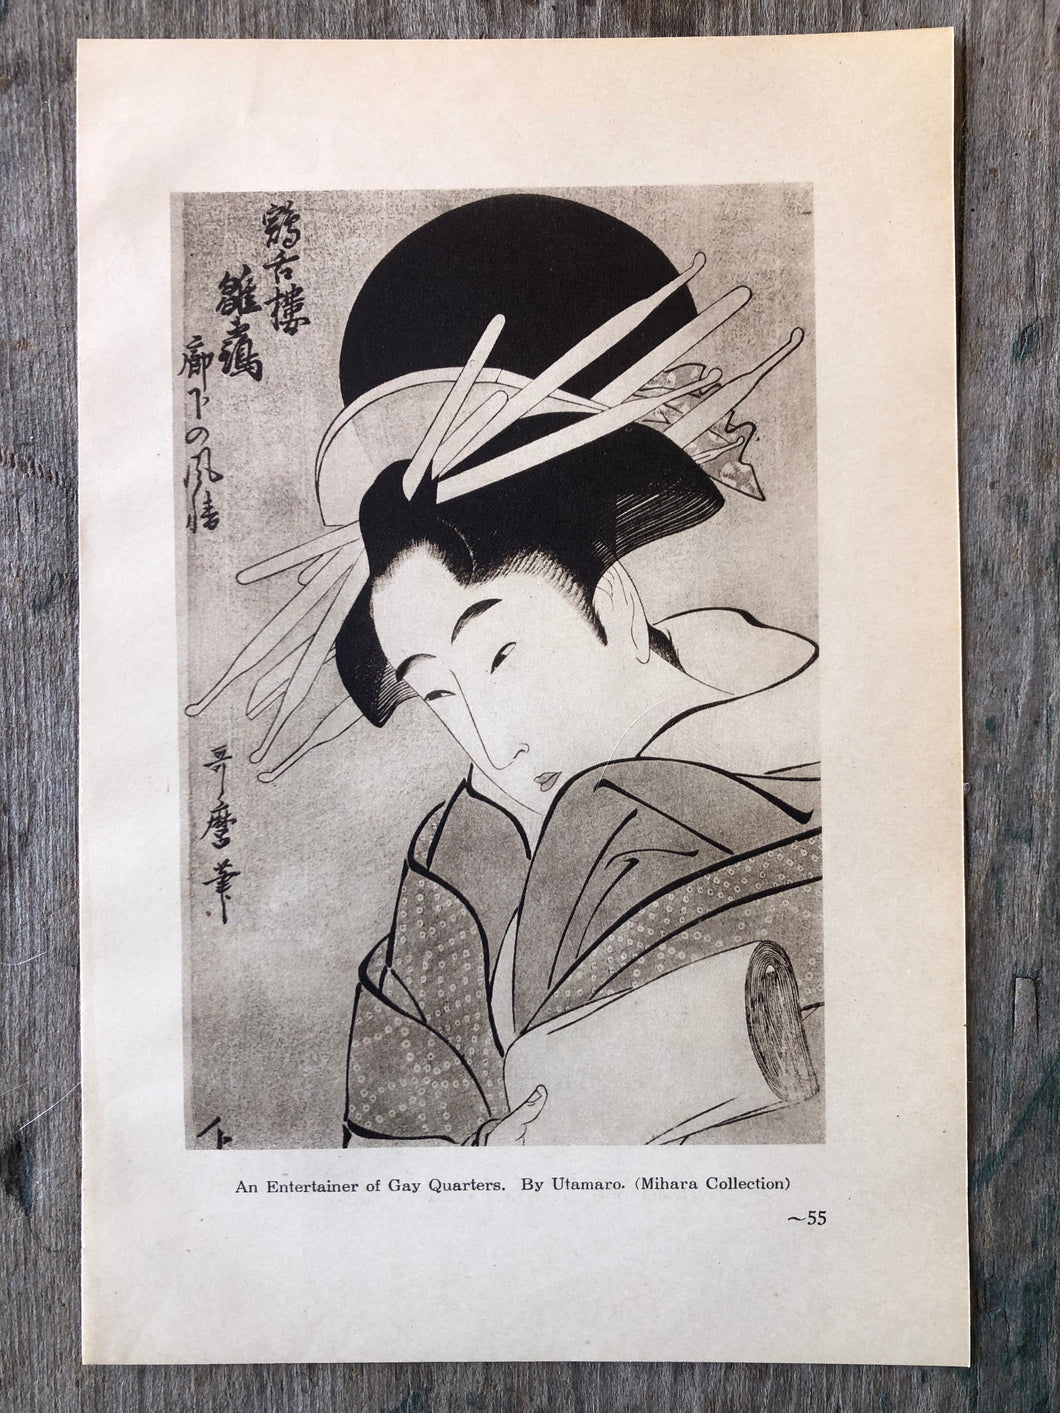 Double-sided Print: An Entertainer of Gay Quarters. By Utamaro. Portrait of Woman. By Eisi.